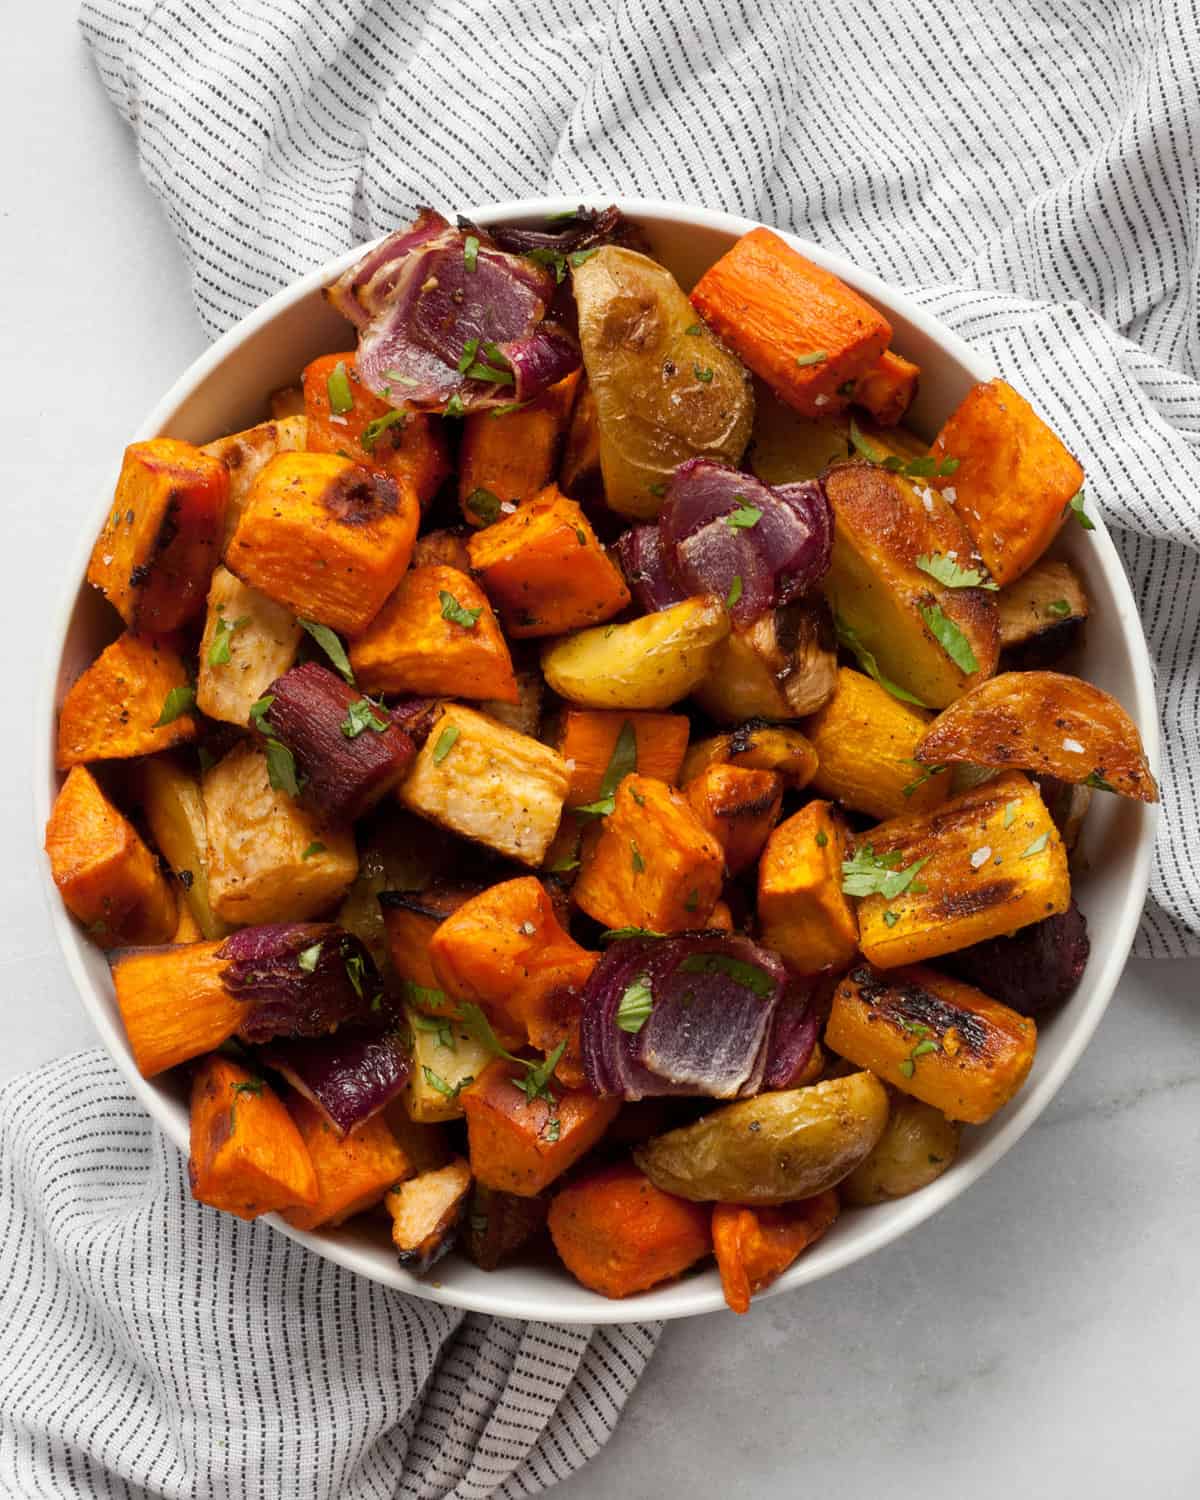 Roasted root vegetables in a bowl.